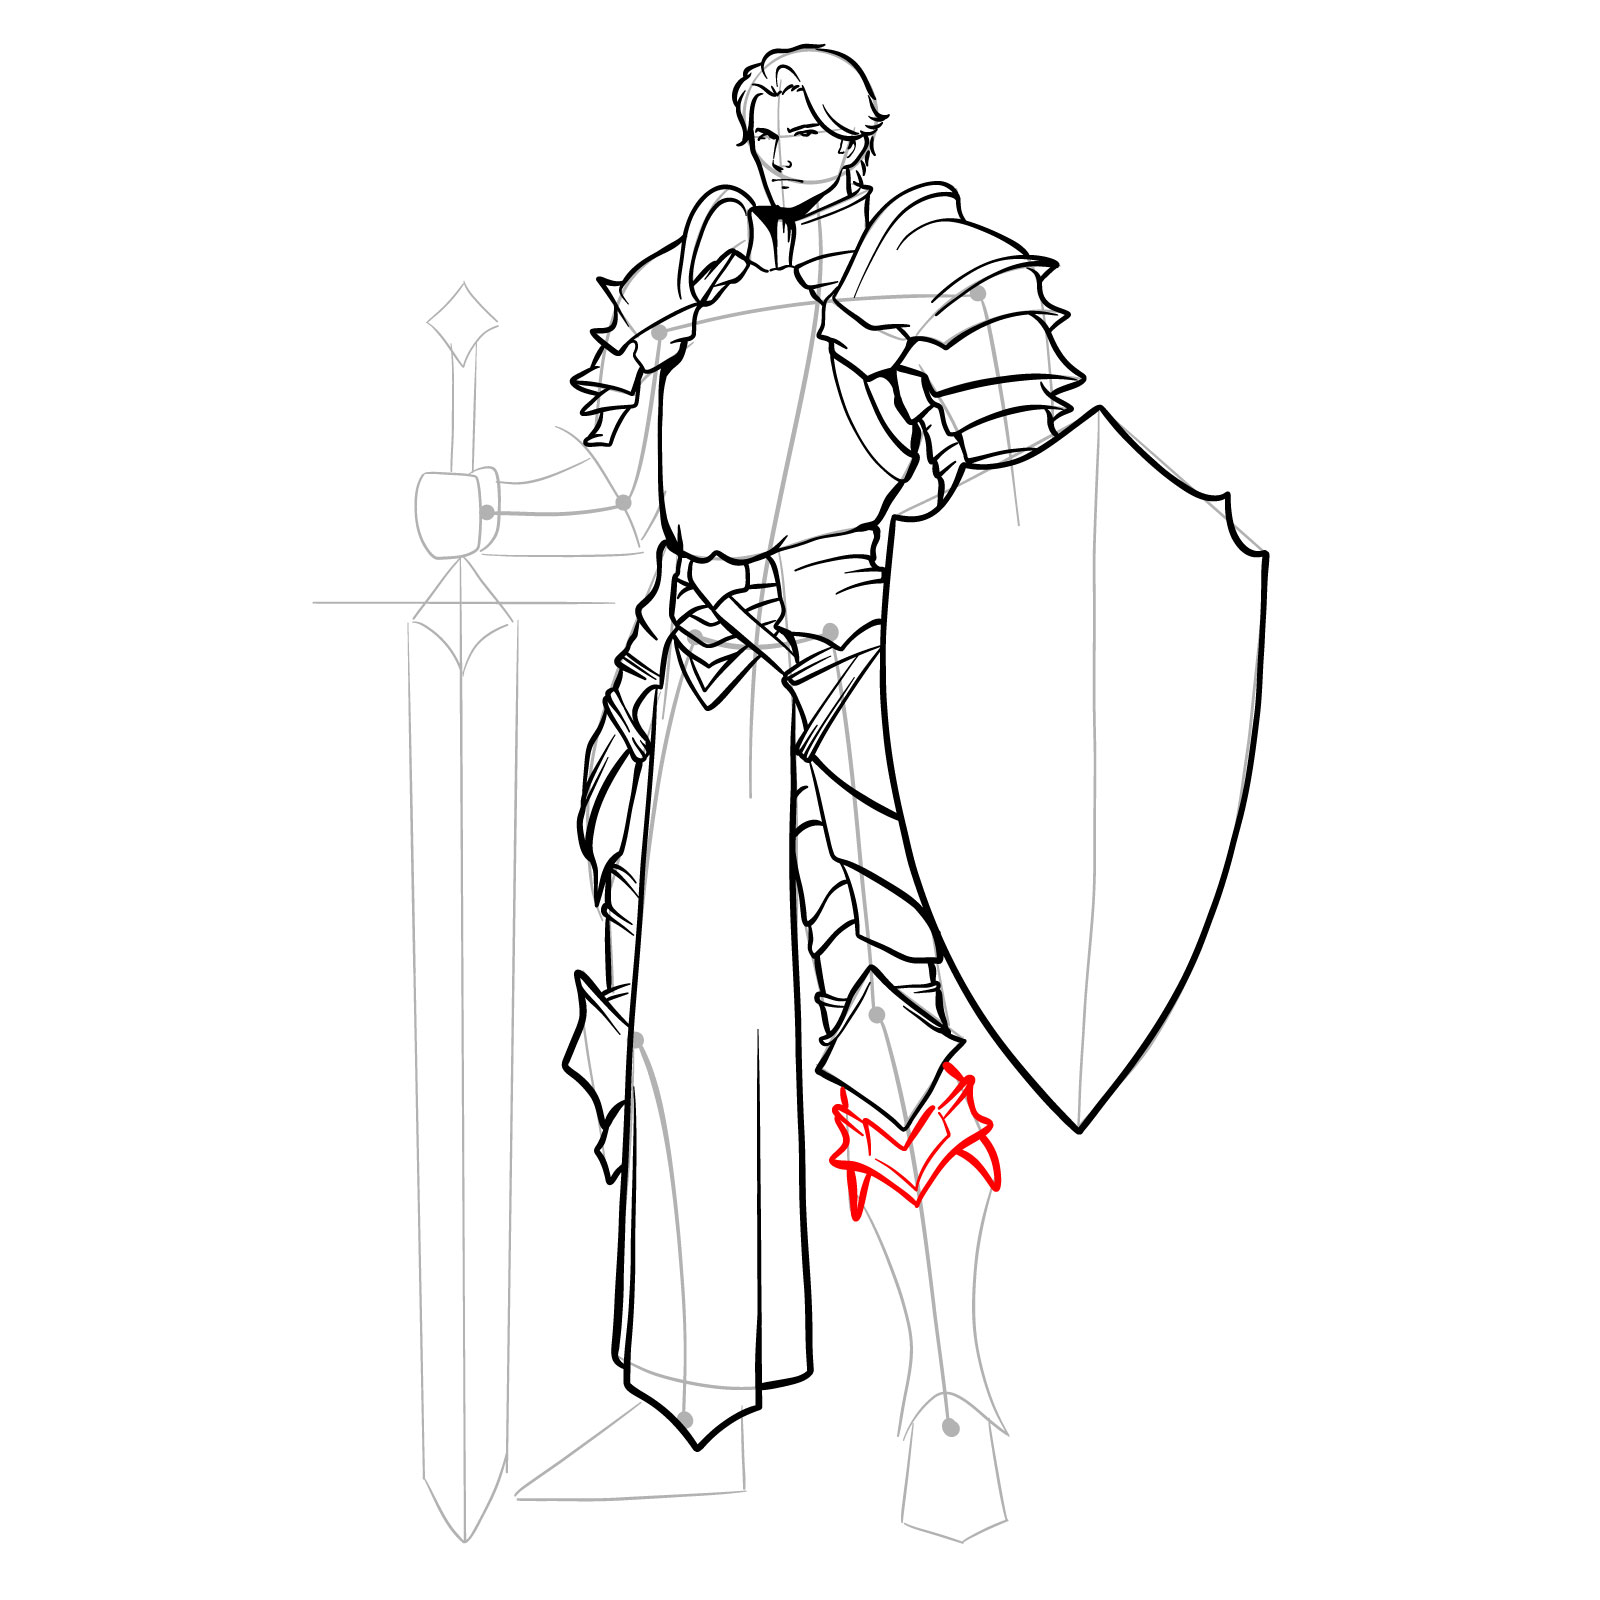 Drawing visible leg armor up to the upper calf on the paladin - step 17